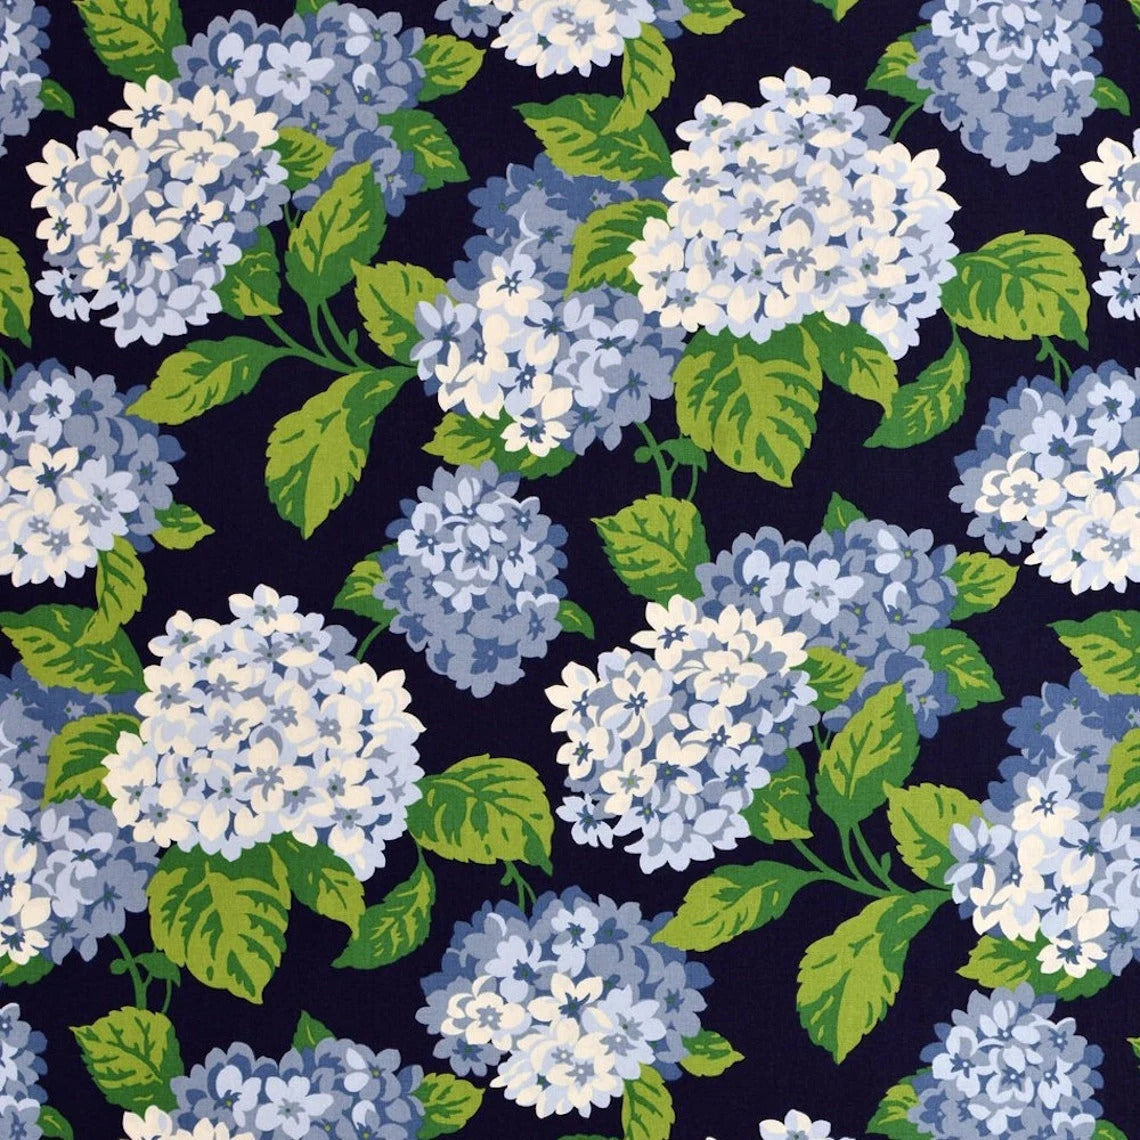 empress swag valance in summerwind navy blue hydrangea floral, large scale